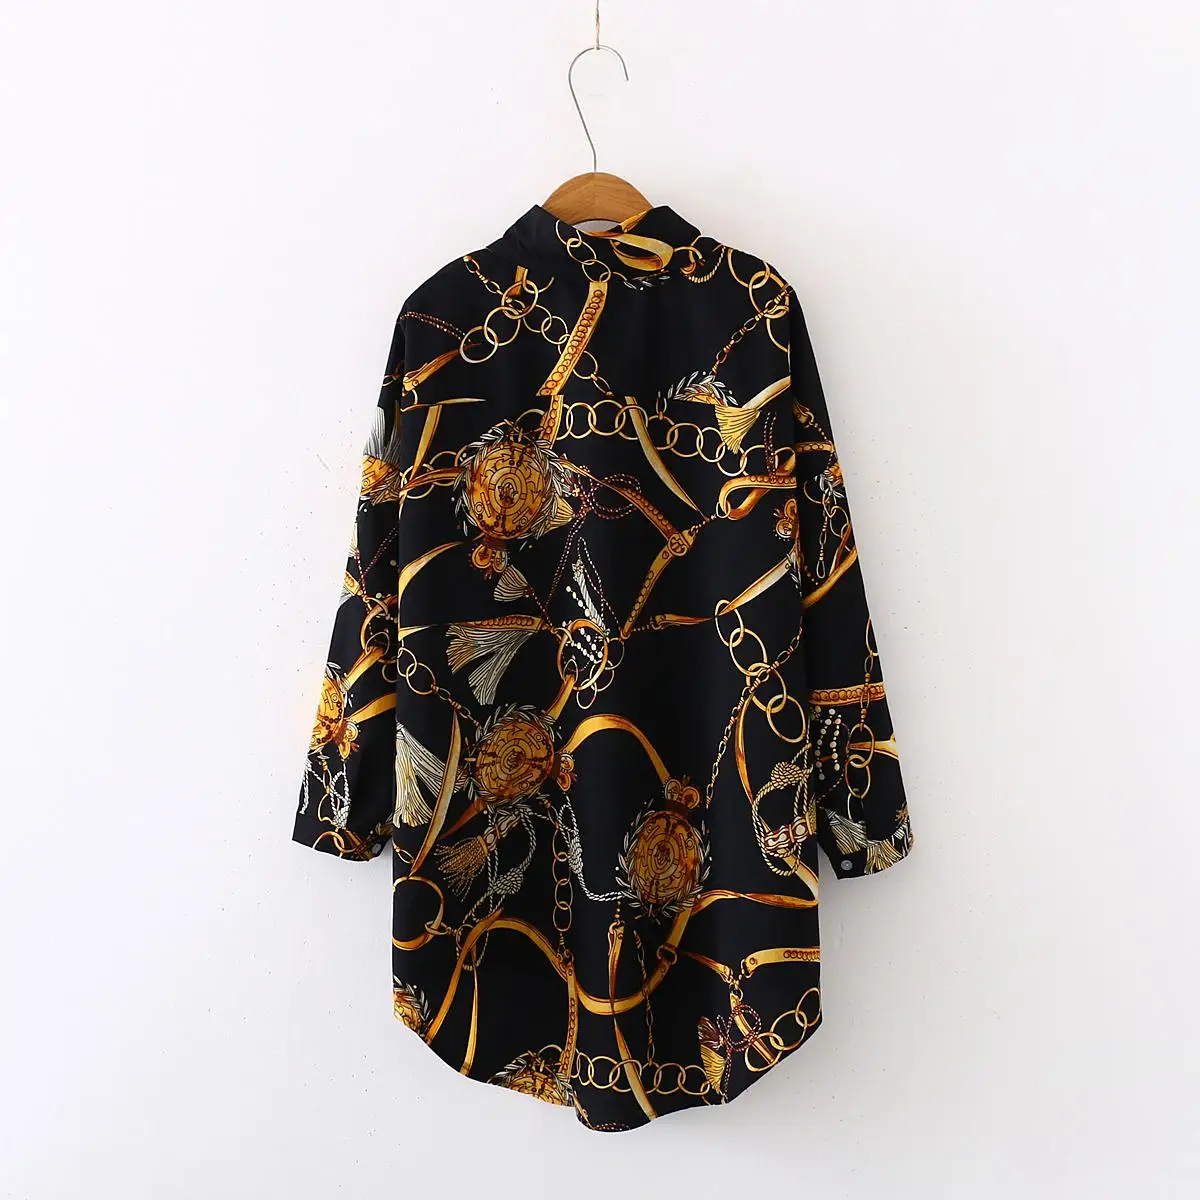 Fashion chained casual oversize Women Blouses Spring chiffon Blouse 3/4 sleeve Loose Casual Tops Shirts 5